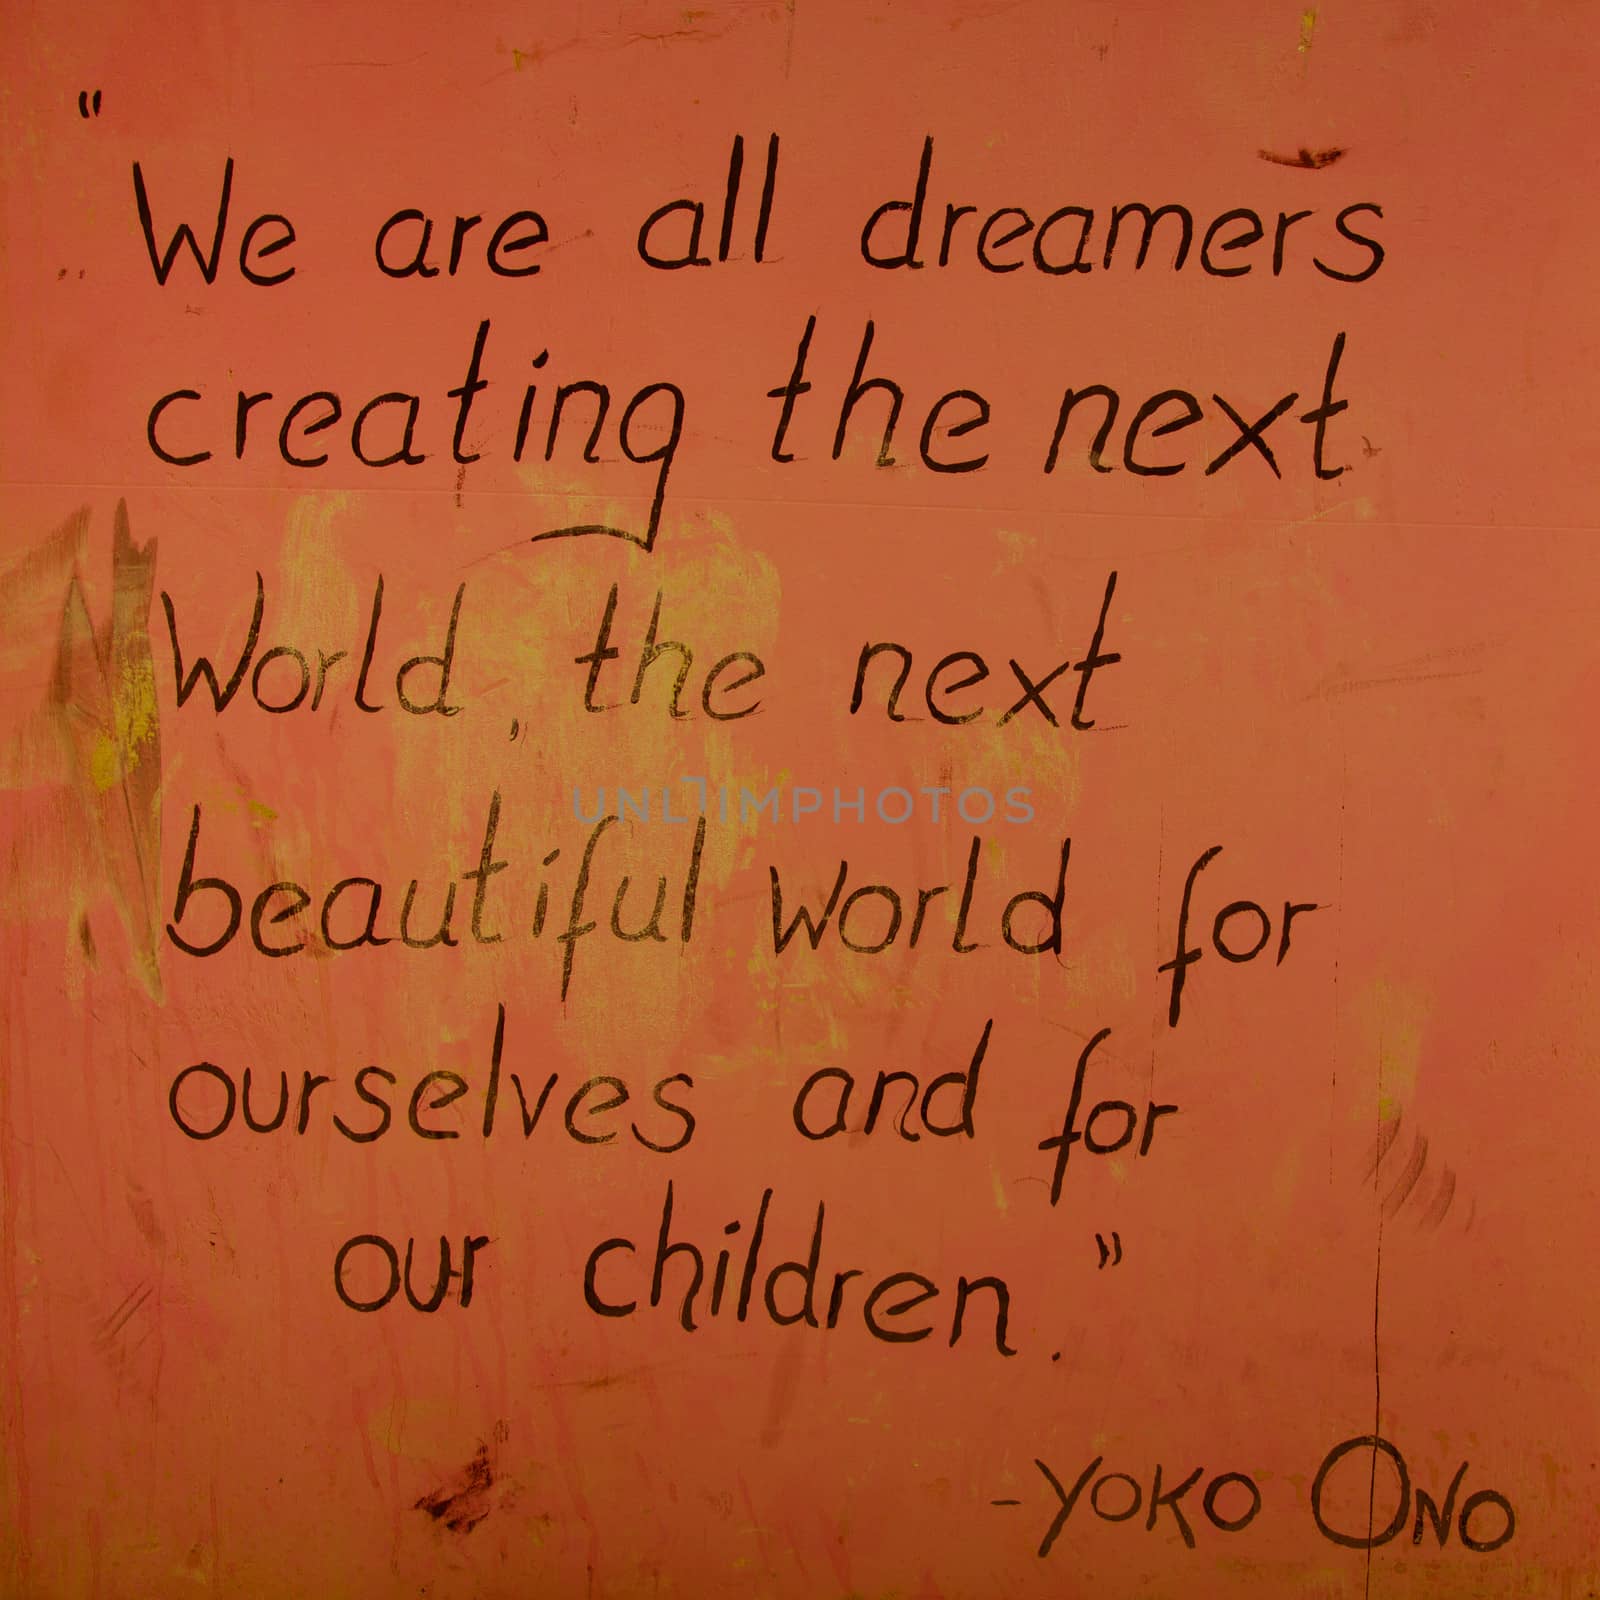 Orange Peace message written on a wall, a famous say from Yoko Ono telling that we have to create the beautiful next world